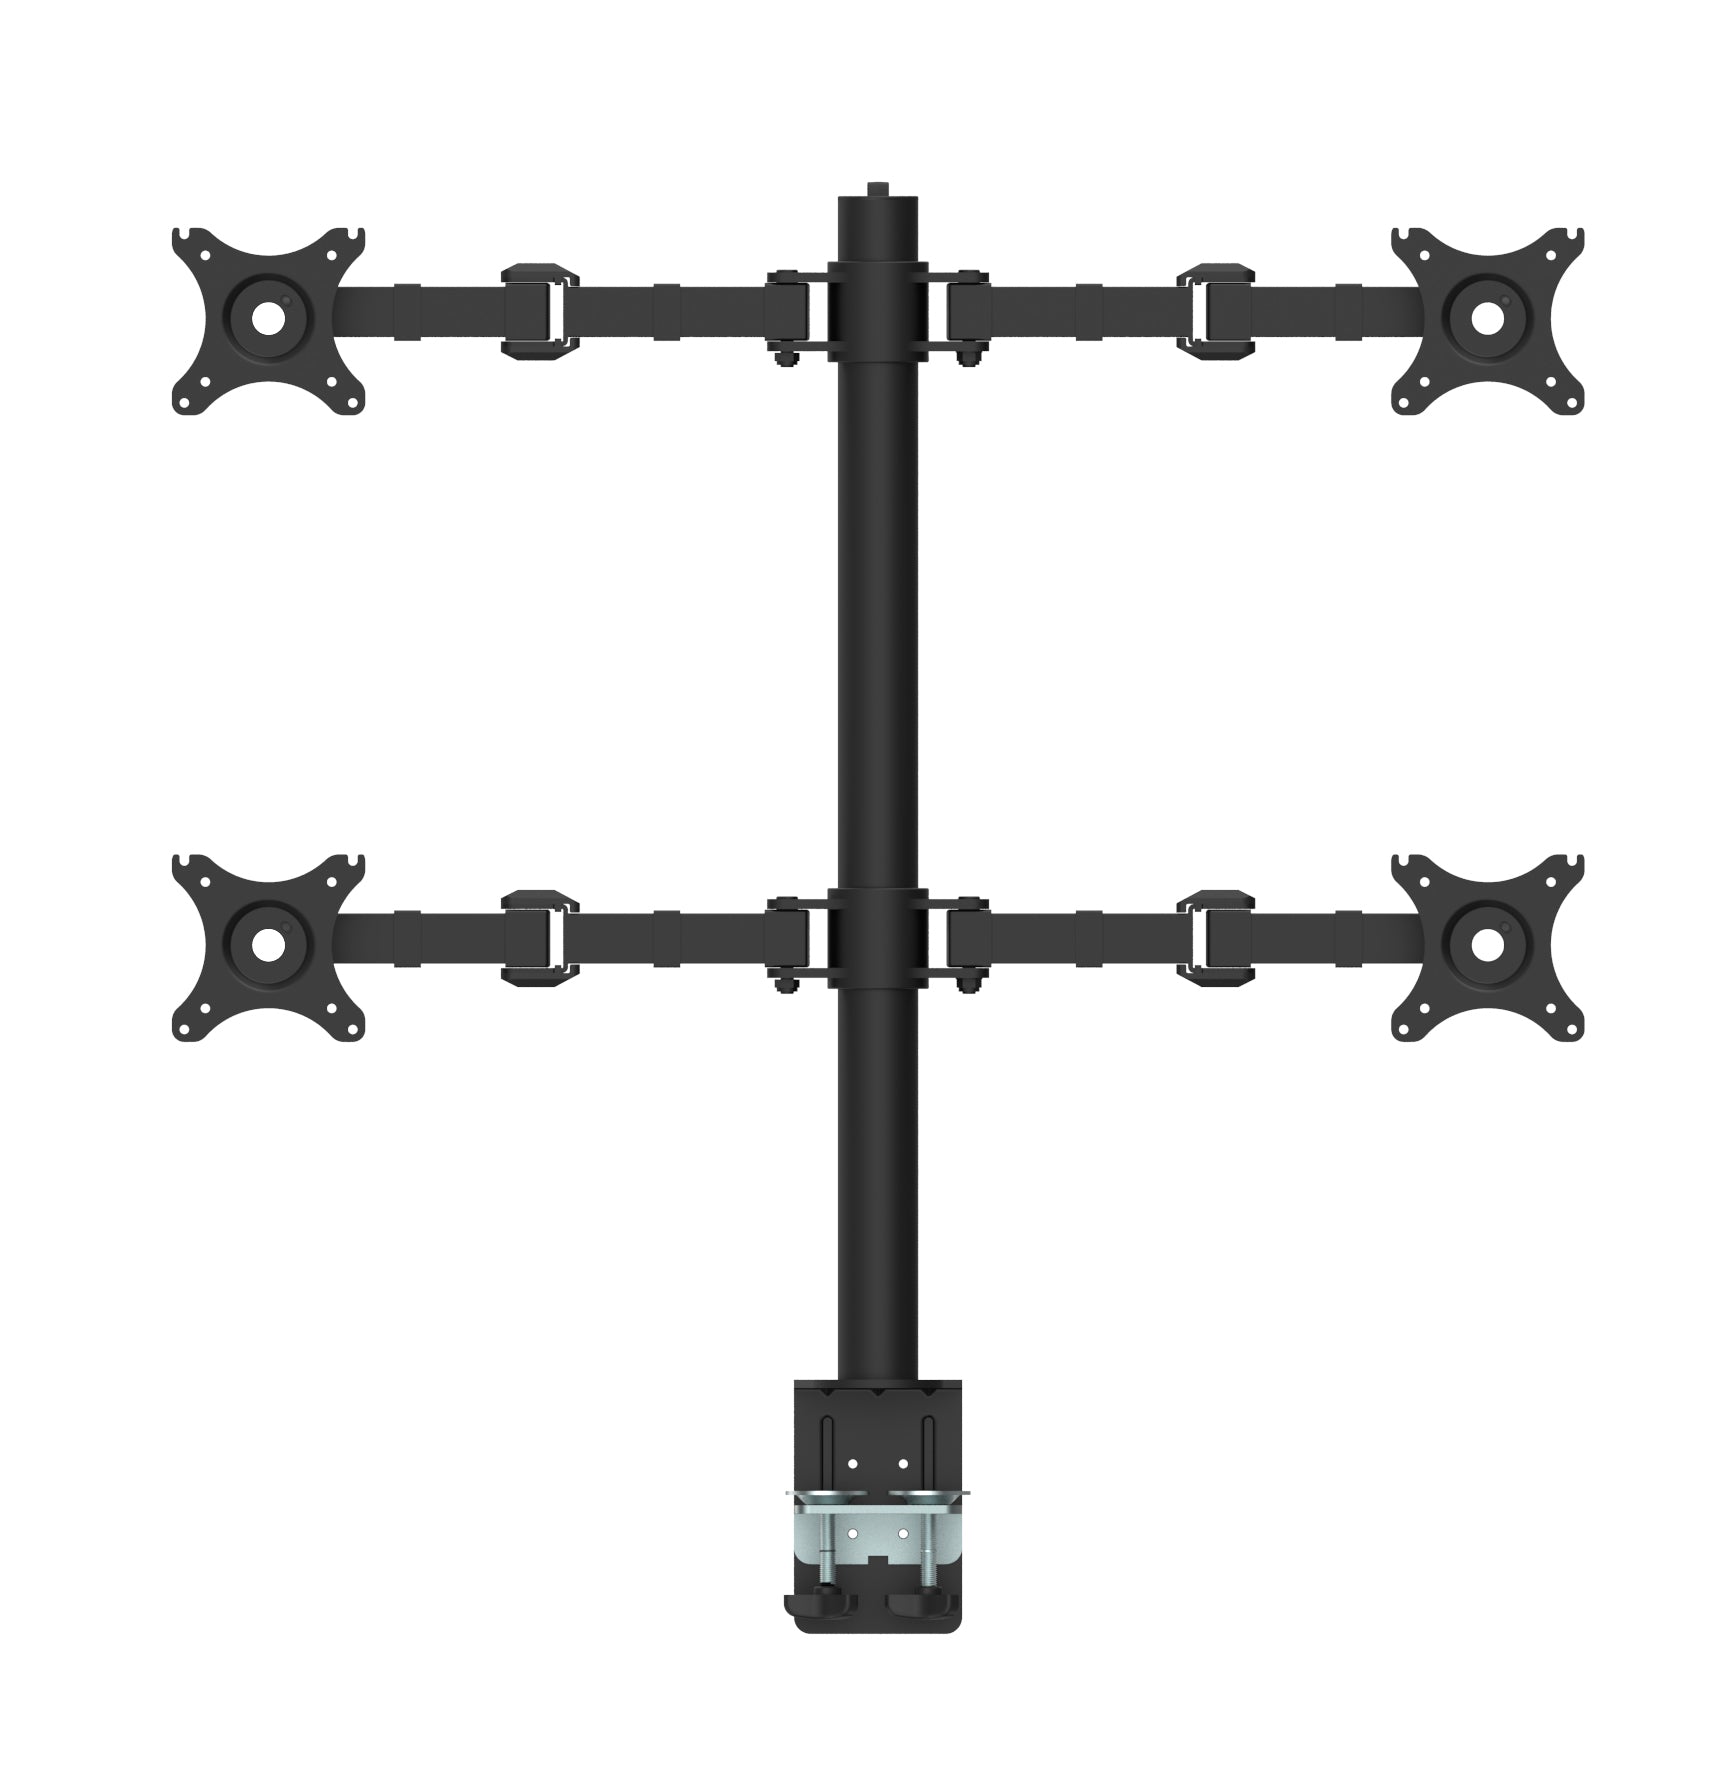 Buy Rapidline Revolve Quad Monitor Arm FREE SHIPPING RMA4 BL Perfect to use with our range of Standing Desks! Liberate your worktop space and improve posture with a Revolve pole-mounted quad monitor arm. With 360 degrees horizontal adjustment and cable management within the pole, and backed by a 3-year warranty. Black